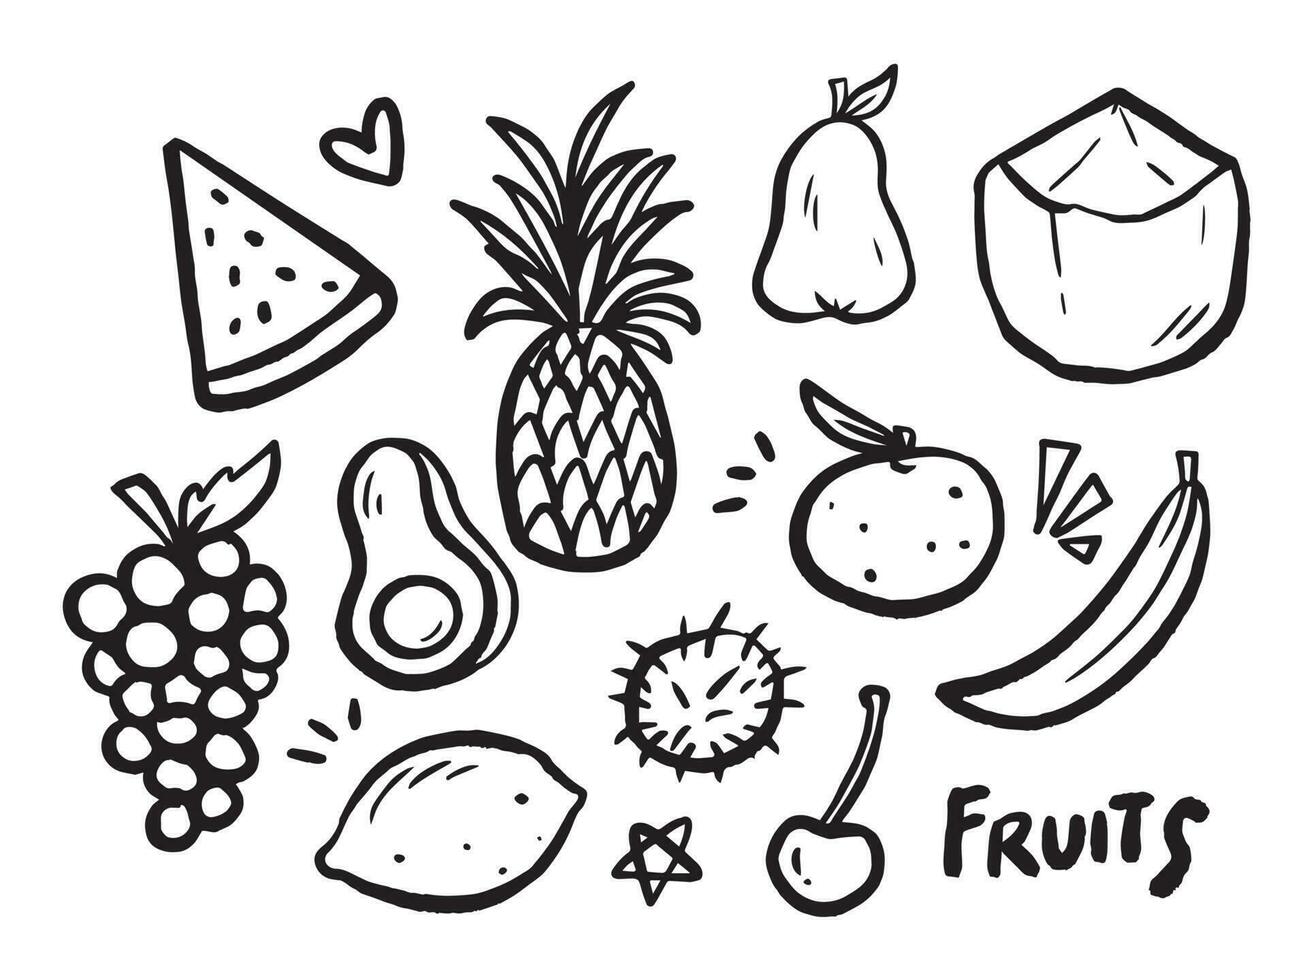 Black and white outlined fruits vector illustration isolated on horizontal landscape template. Simple flat monochrome healthy food drawing.